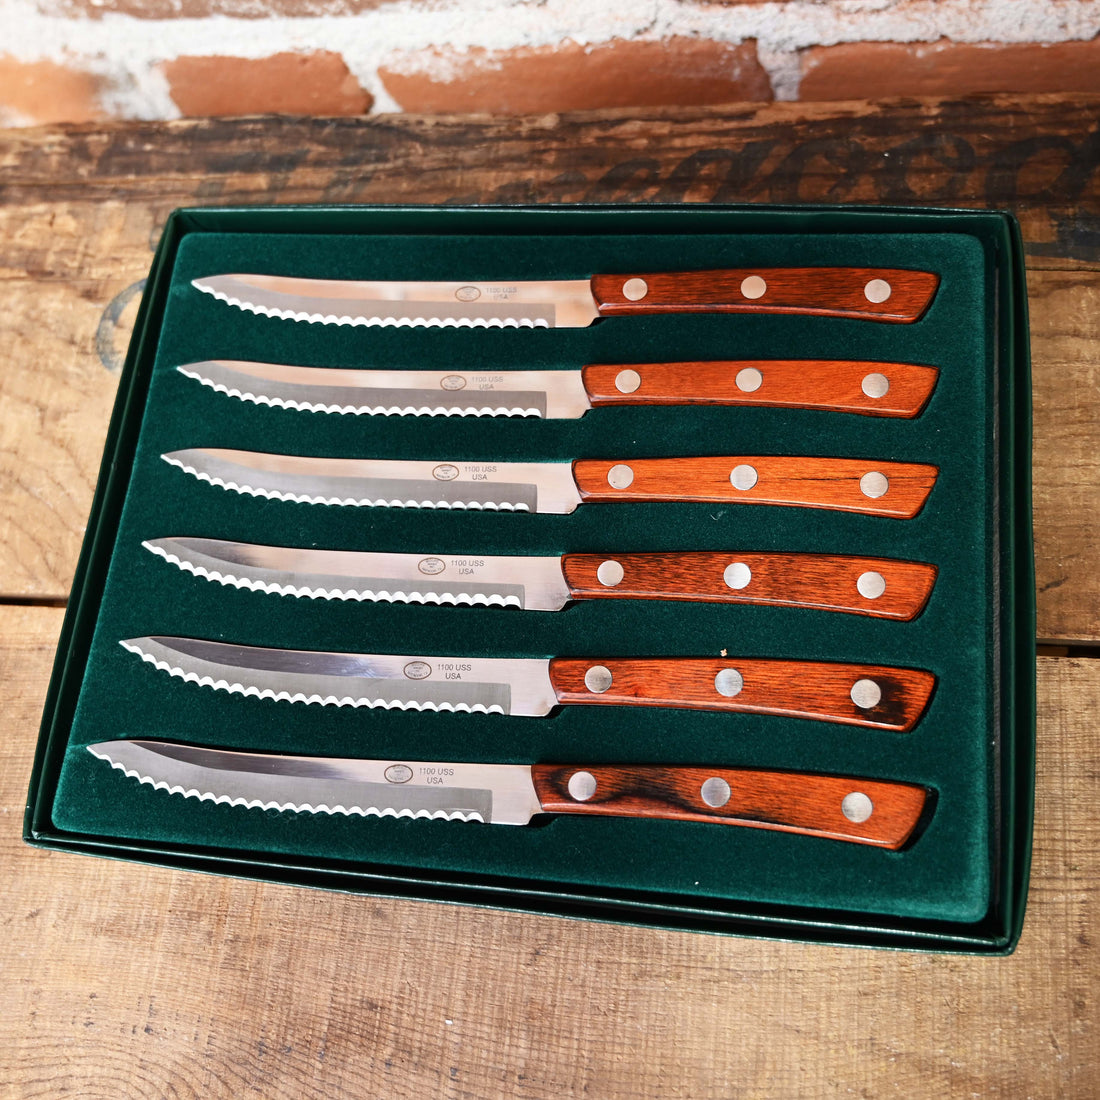 Rosewood Steak Knives view of knives